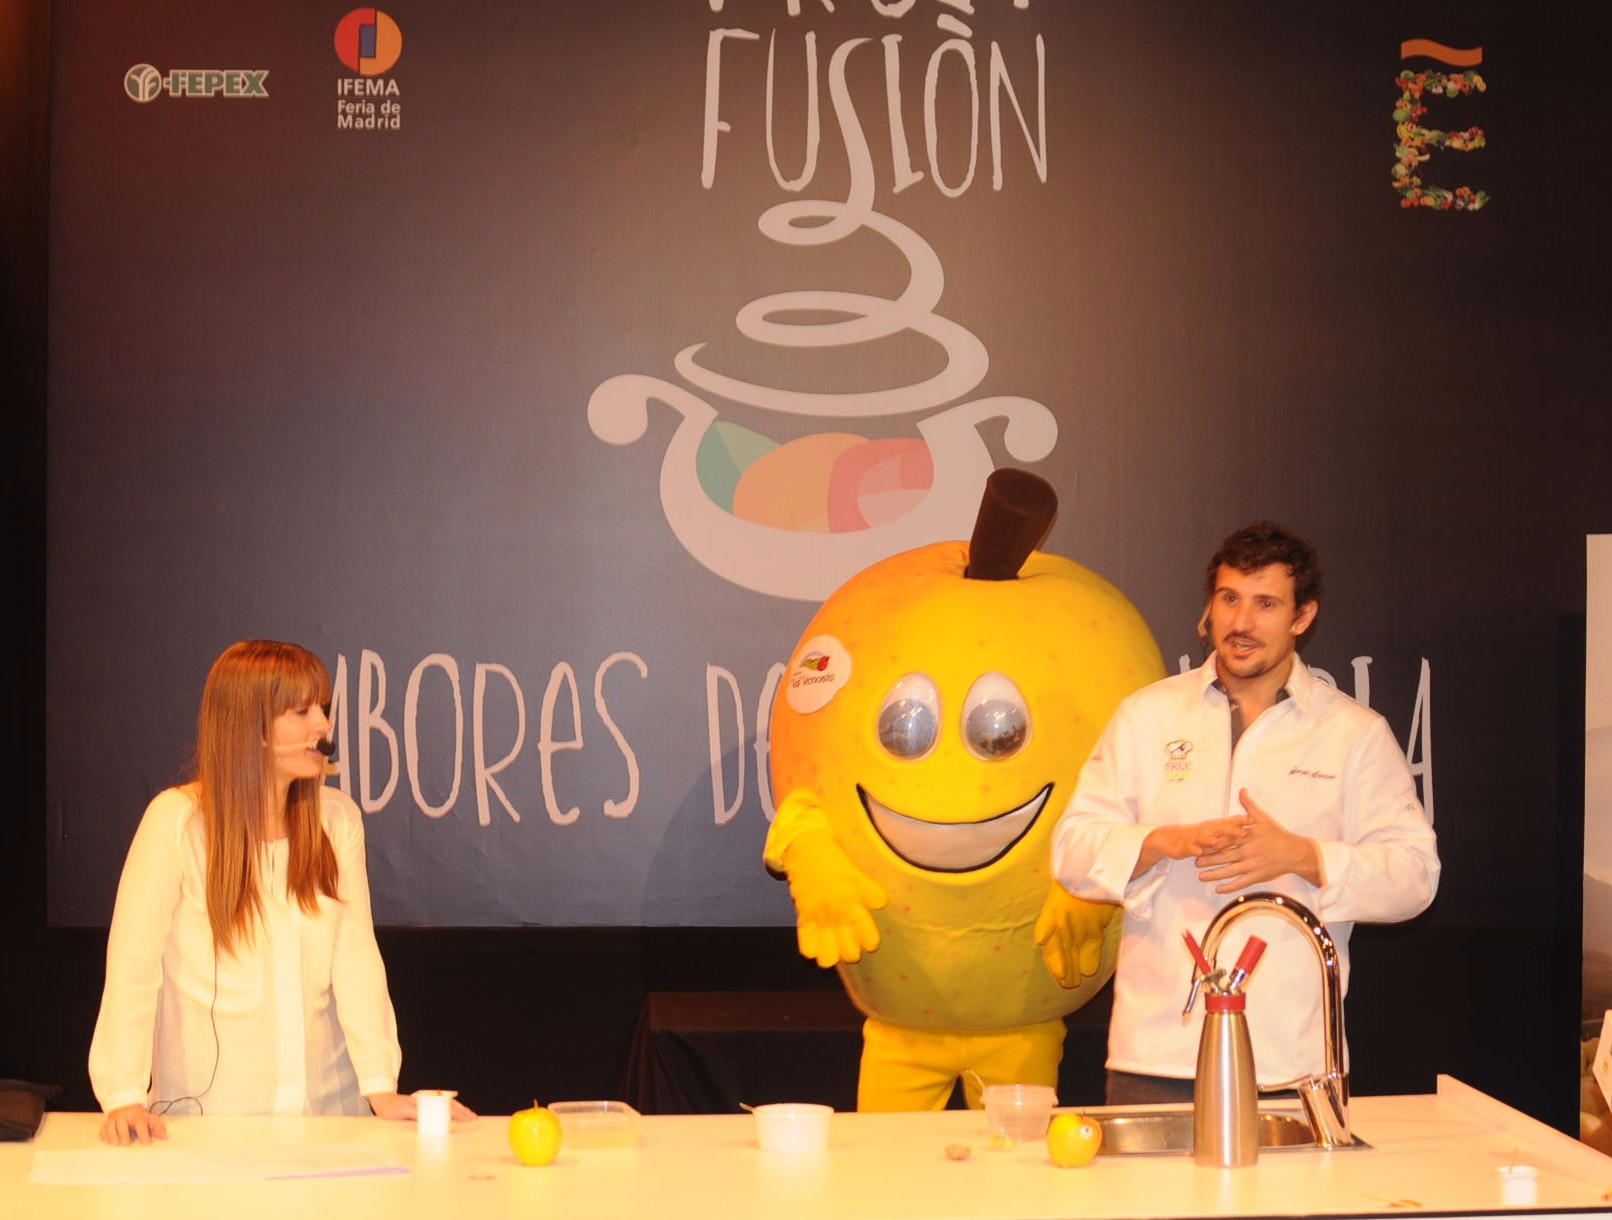 With its slogan "Avant-garde flavours", Fruit Fusion is a unique opportunity for producers to promote their products to the international channel though attractive demonstrations, product tastings and cooking shows courtesy of renowned chefs